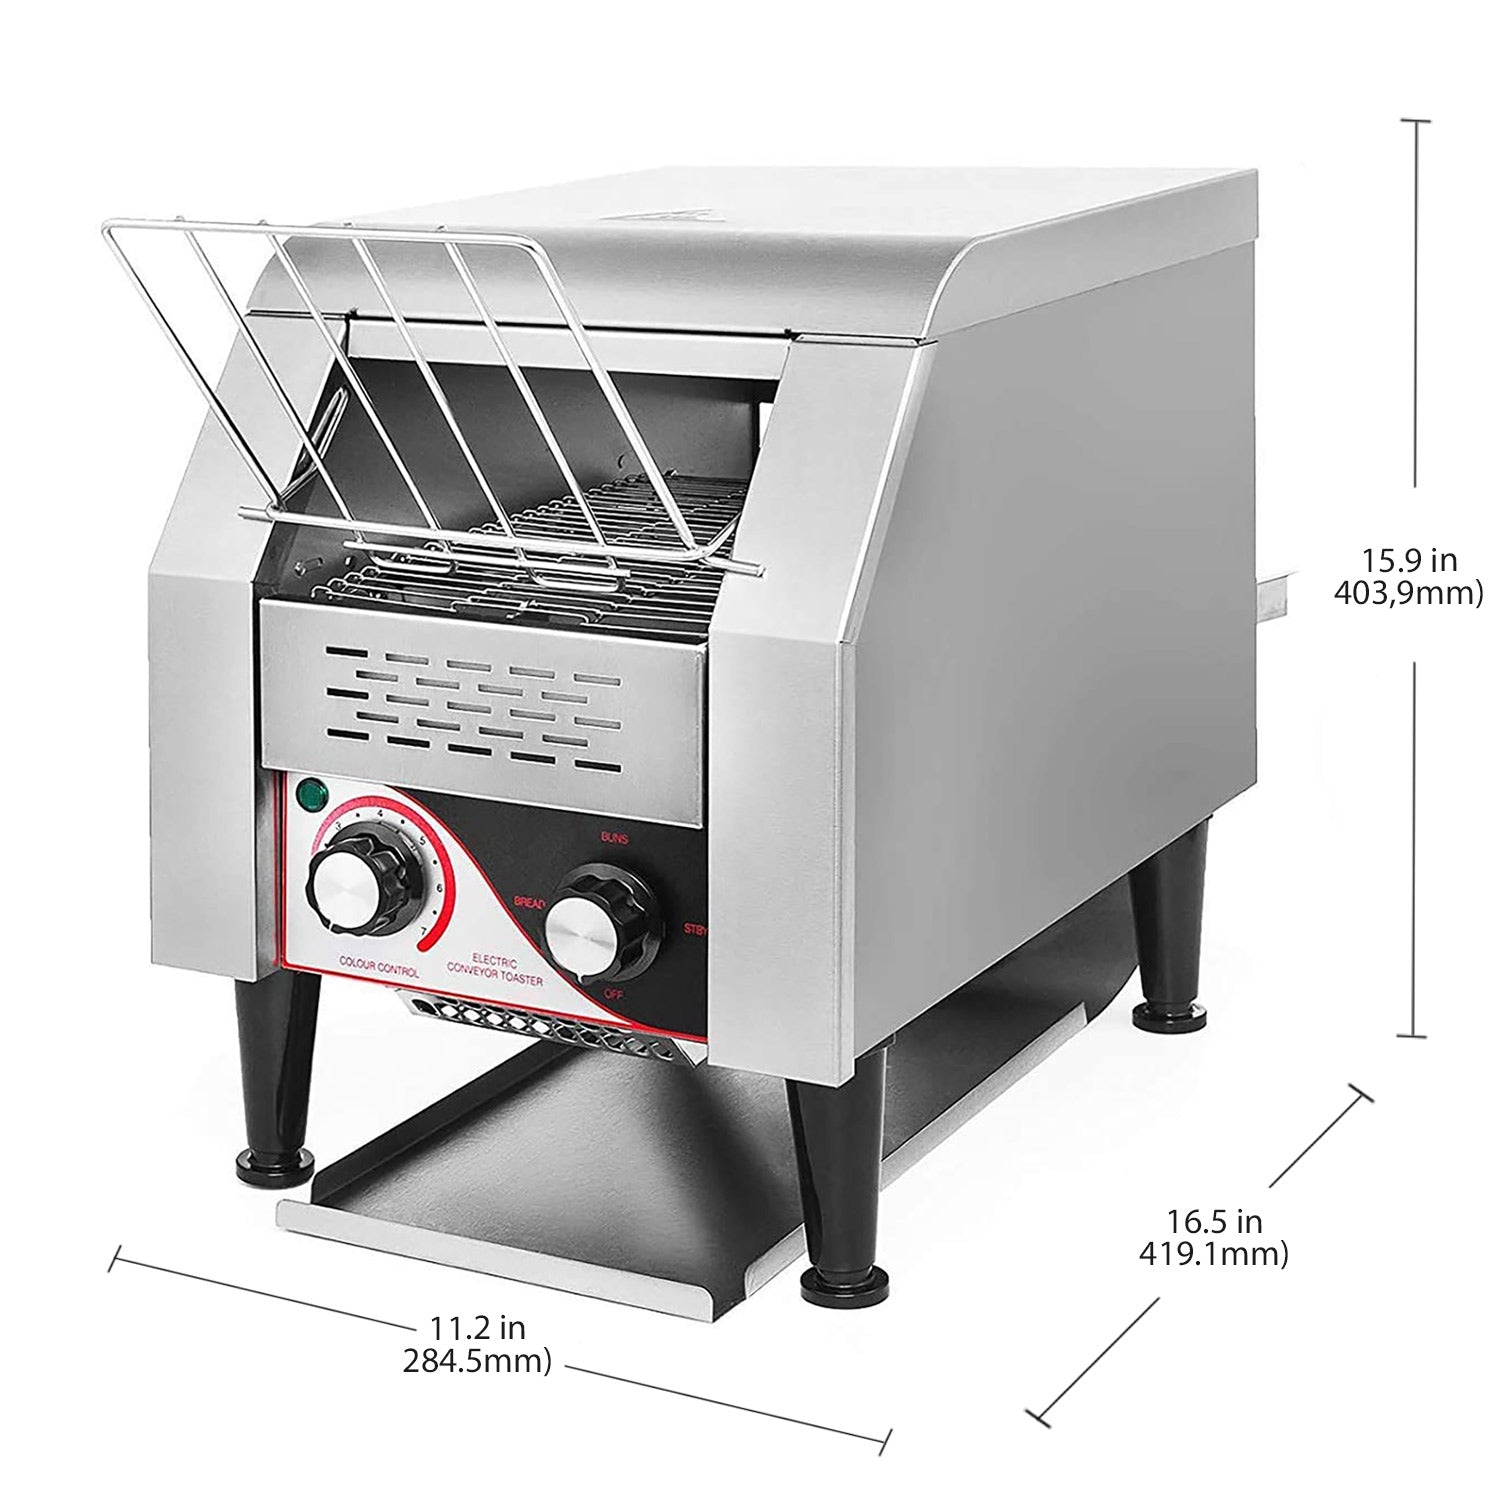 ALD-150H Commercial Conveyor Toaster | Professional Heavy Duty | Stainless Steel | 150PCs per Hour